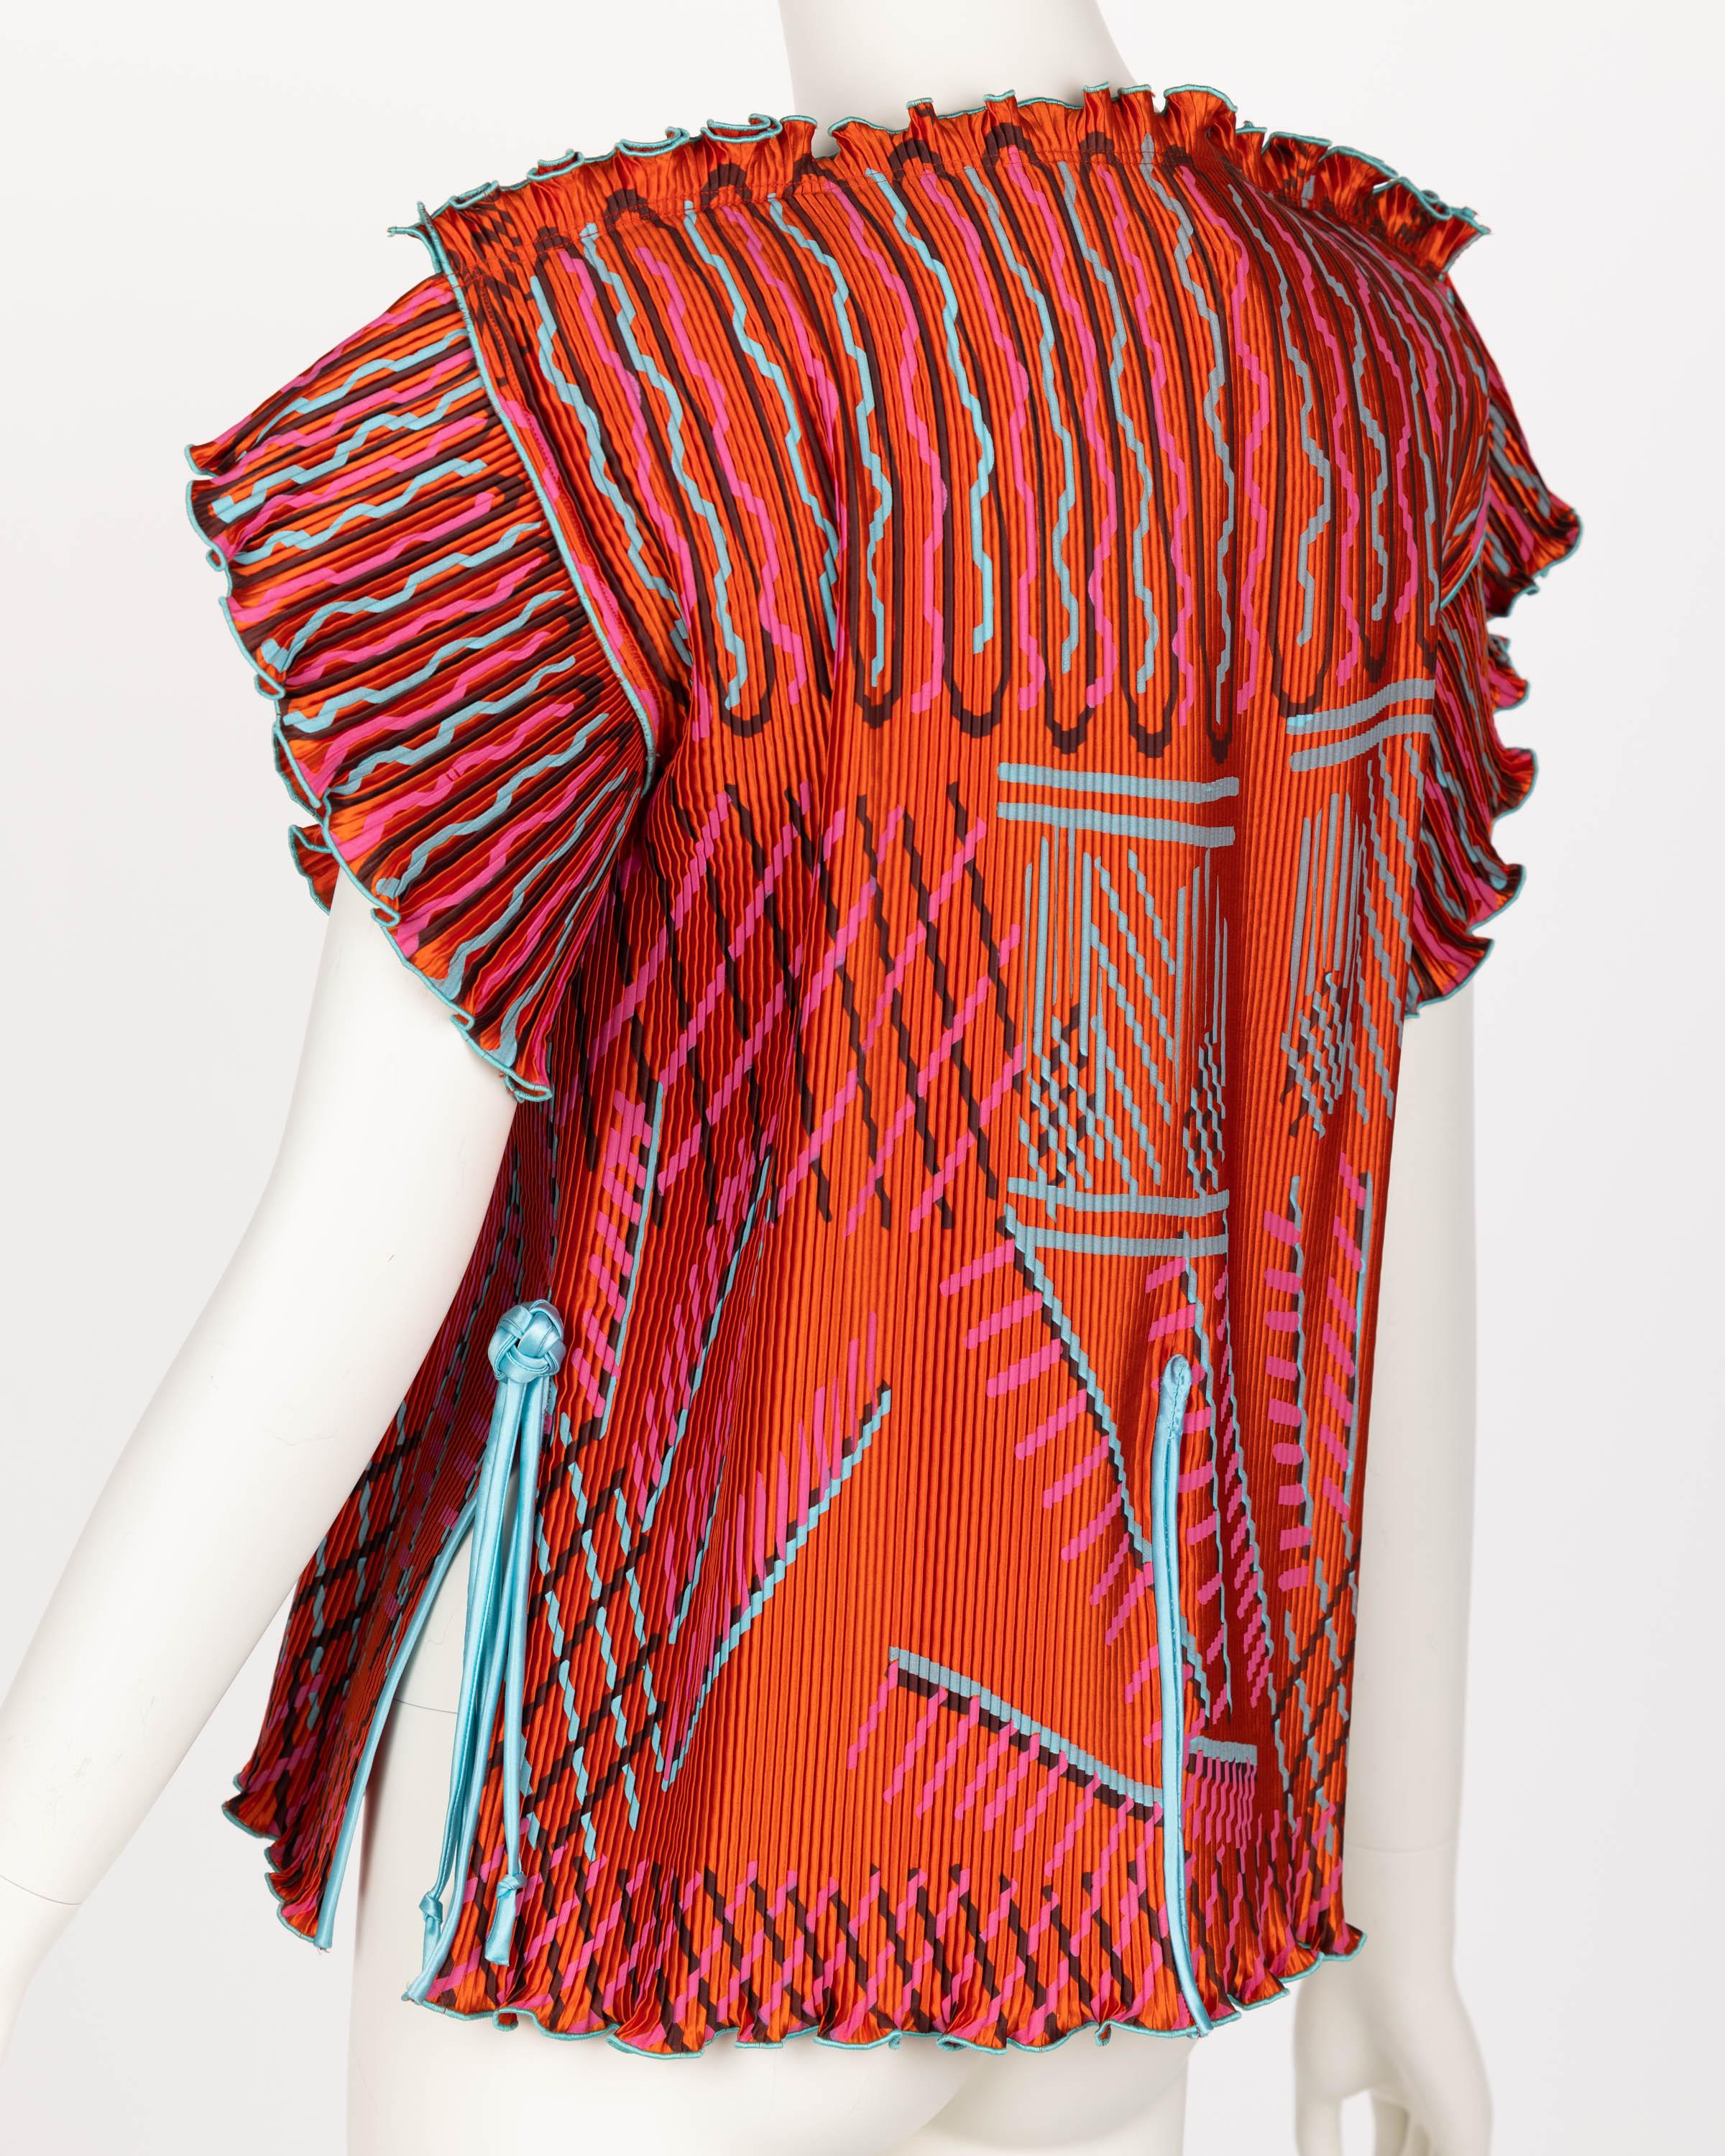 Zandra Rhodes Red Orange Hand Painted Pleated Jacket Top 1970s In Excellent Condition For Sale In Boca Raton, FL